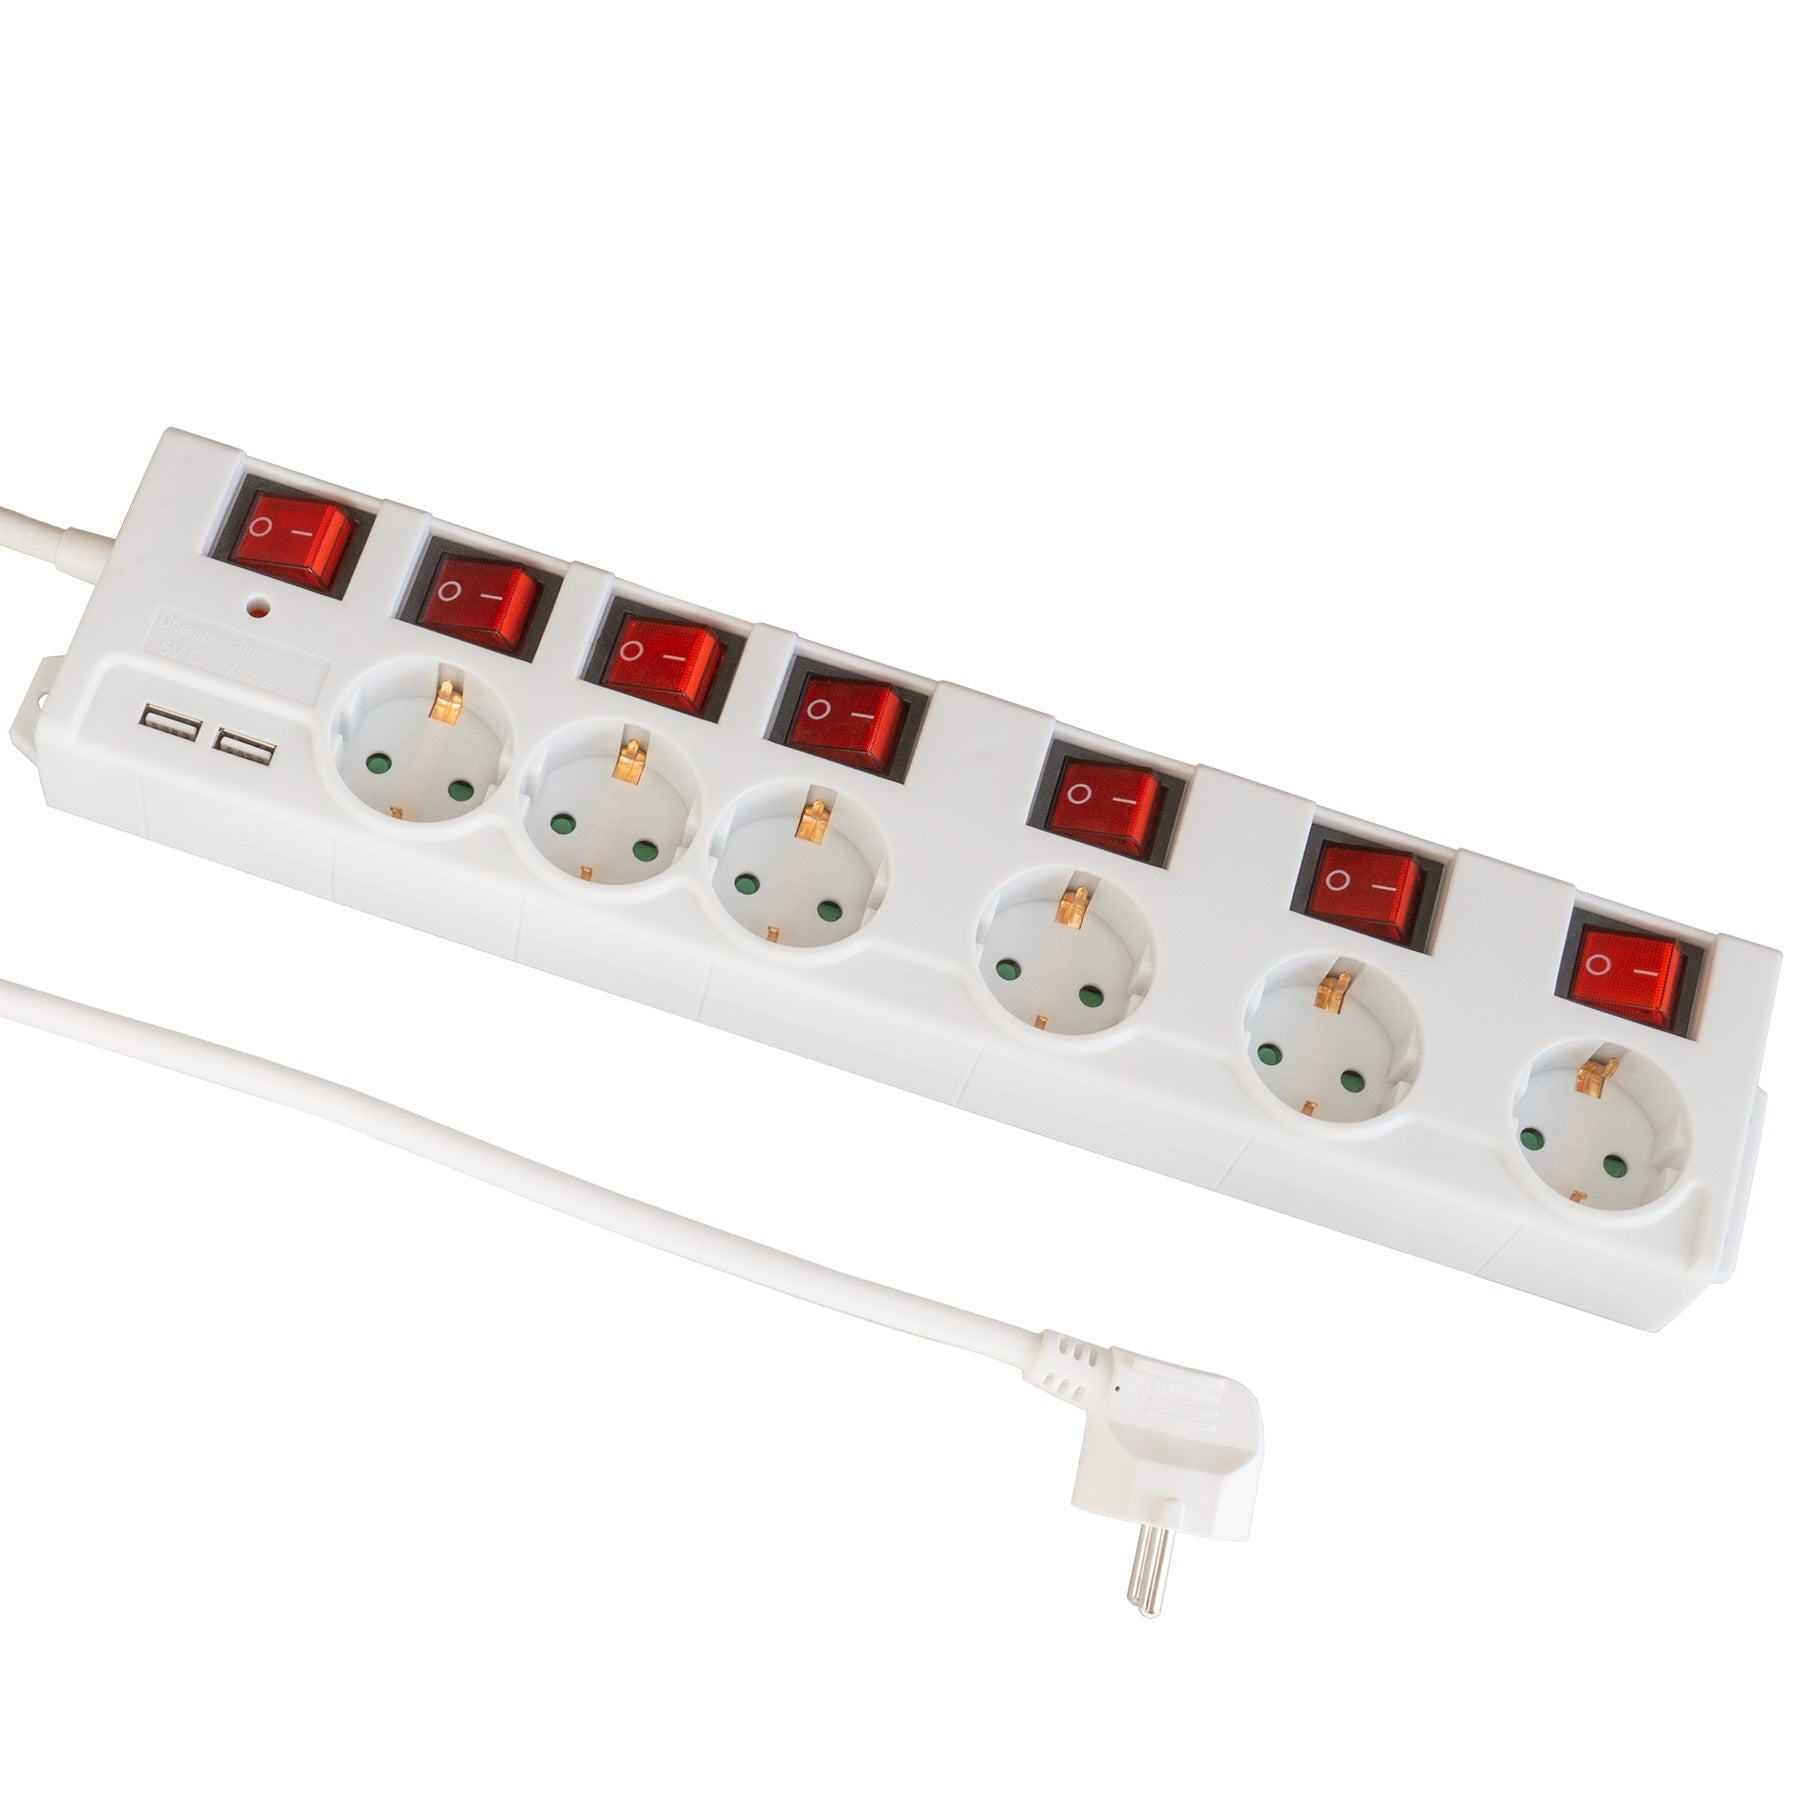 MD000652 6-socket power strip individually switchable with USB - FeinTech